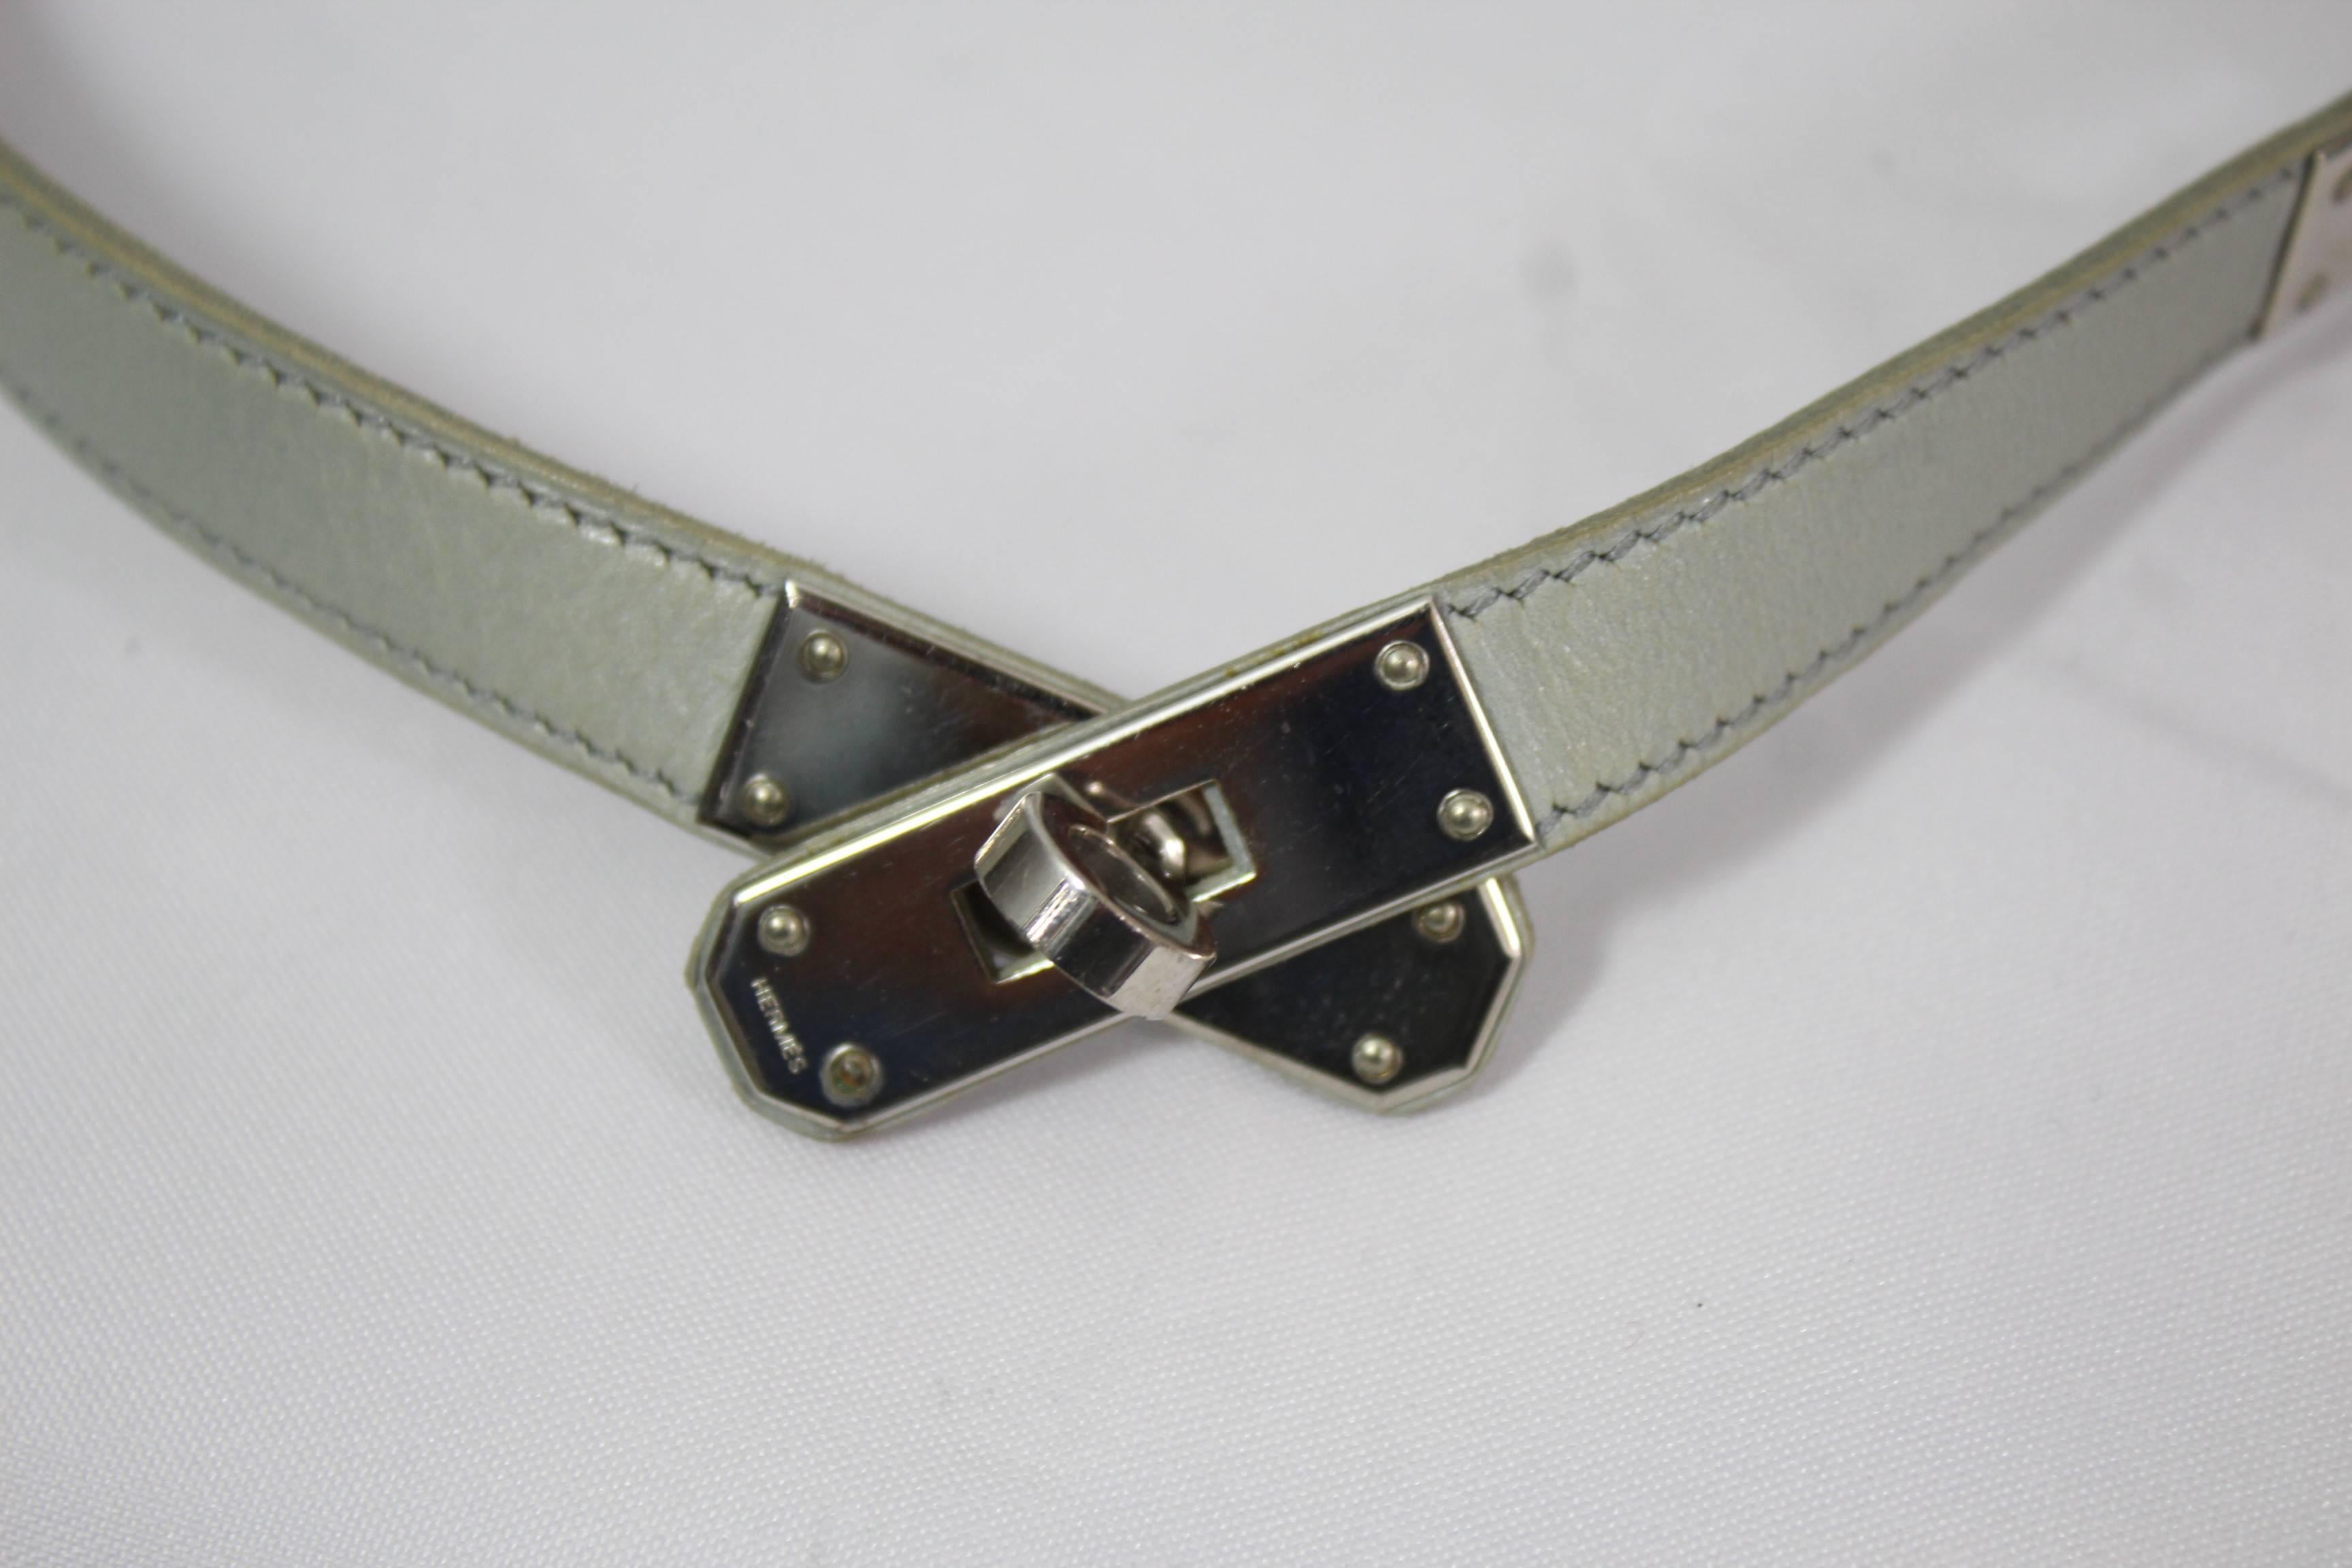 Hermes kelly necklace in leather and palladium plated metaal.

Some signs of use in the leather.